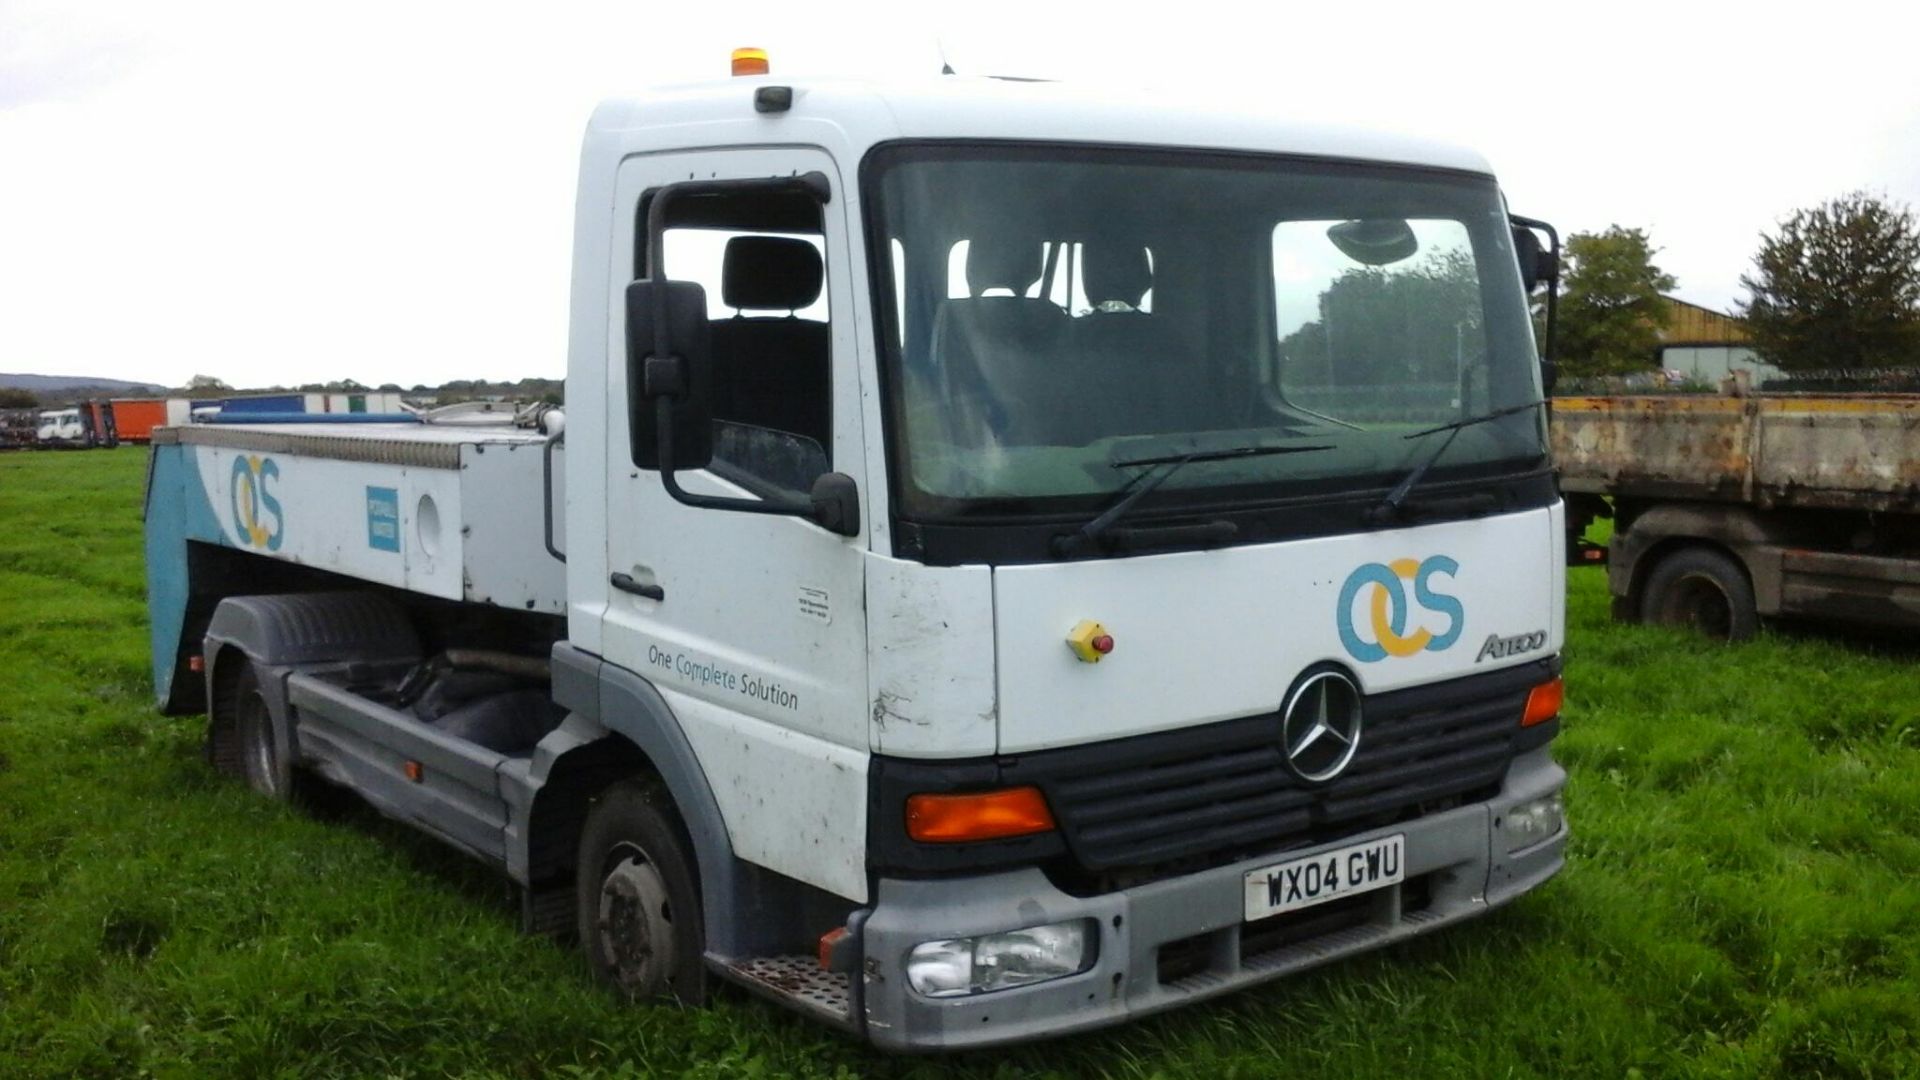 2004/04 REG MERCEDES CVS ATEGO 815 DAY DIESEL WHITE 4X2 AIRCRAFT BOWSER, SHOWING 0 FORMER KEEPERS